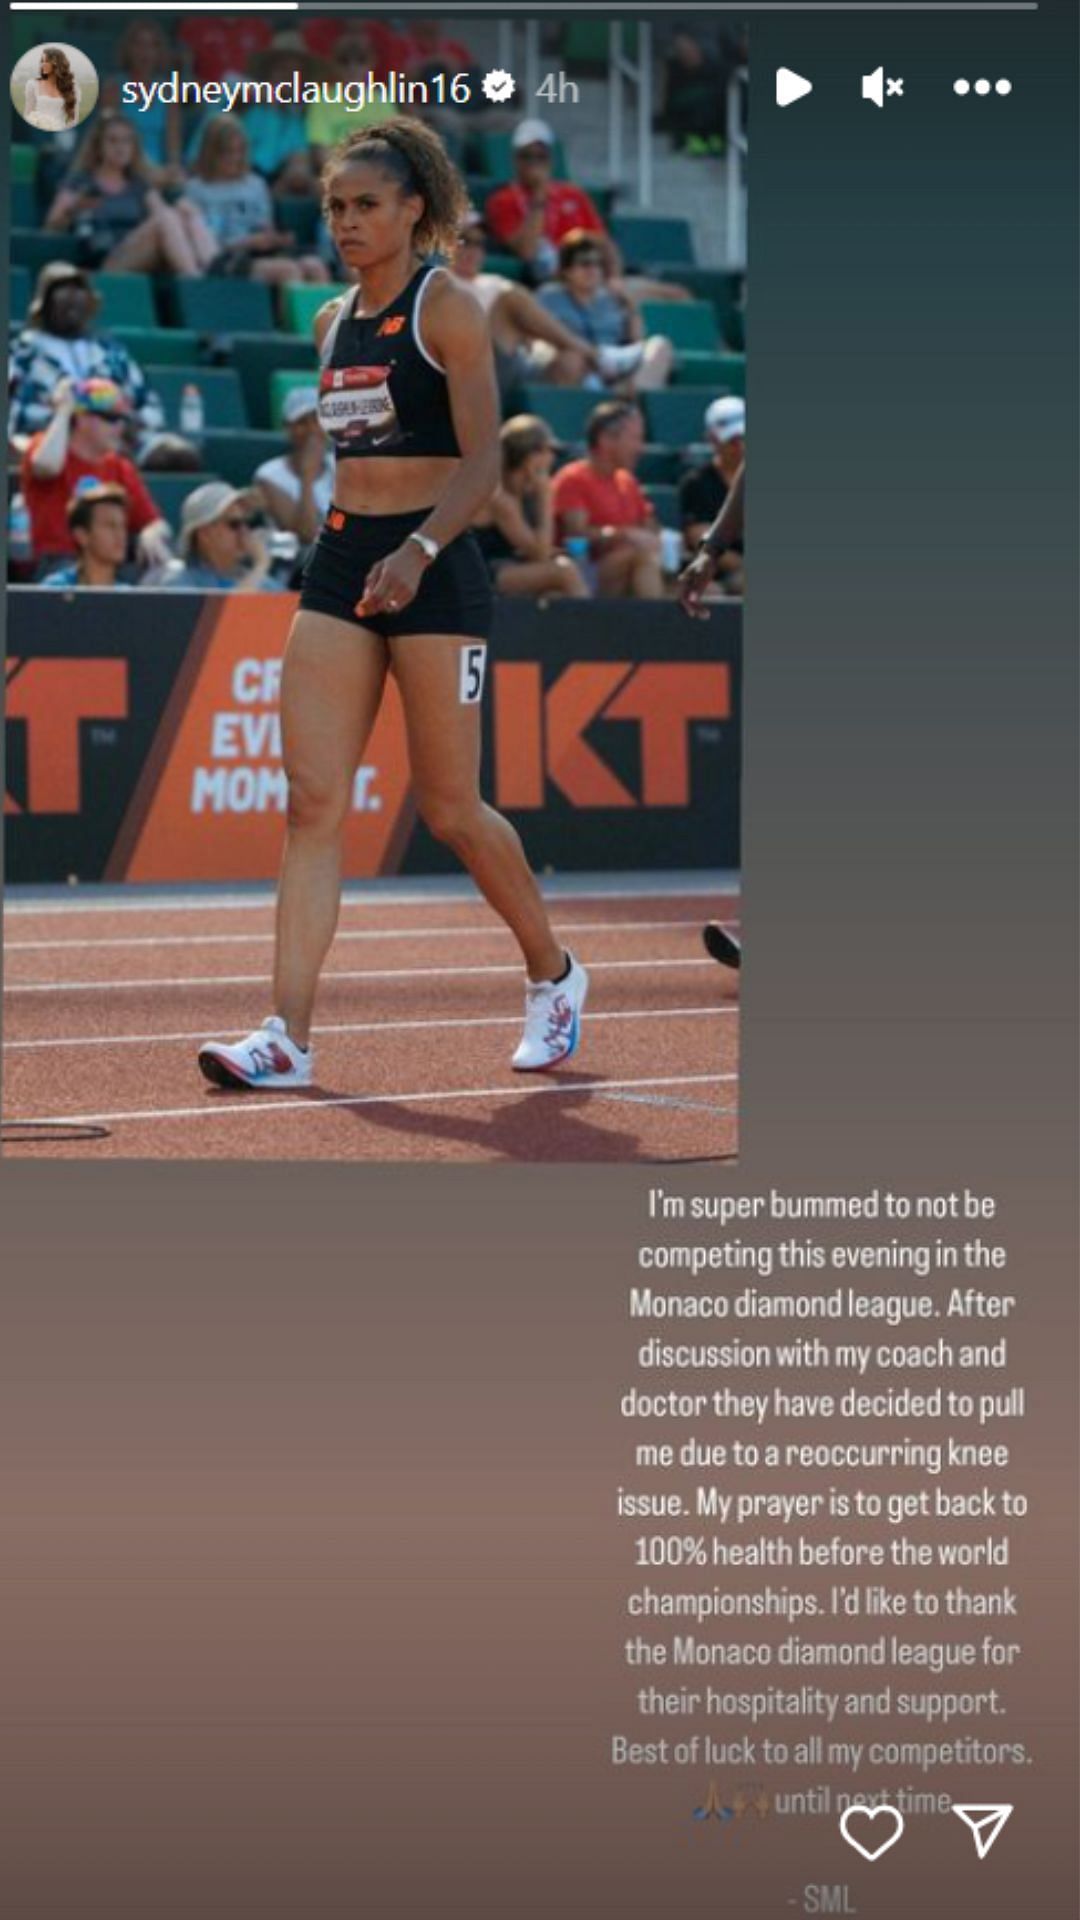 Sydney McLaughlin-Levrone expresses her disappointment